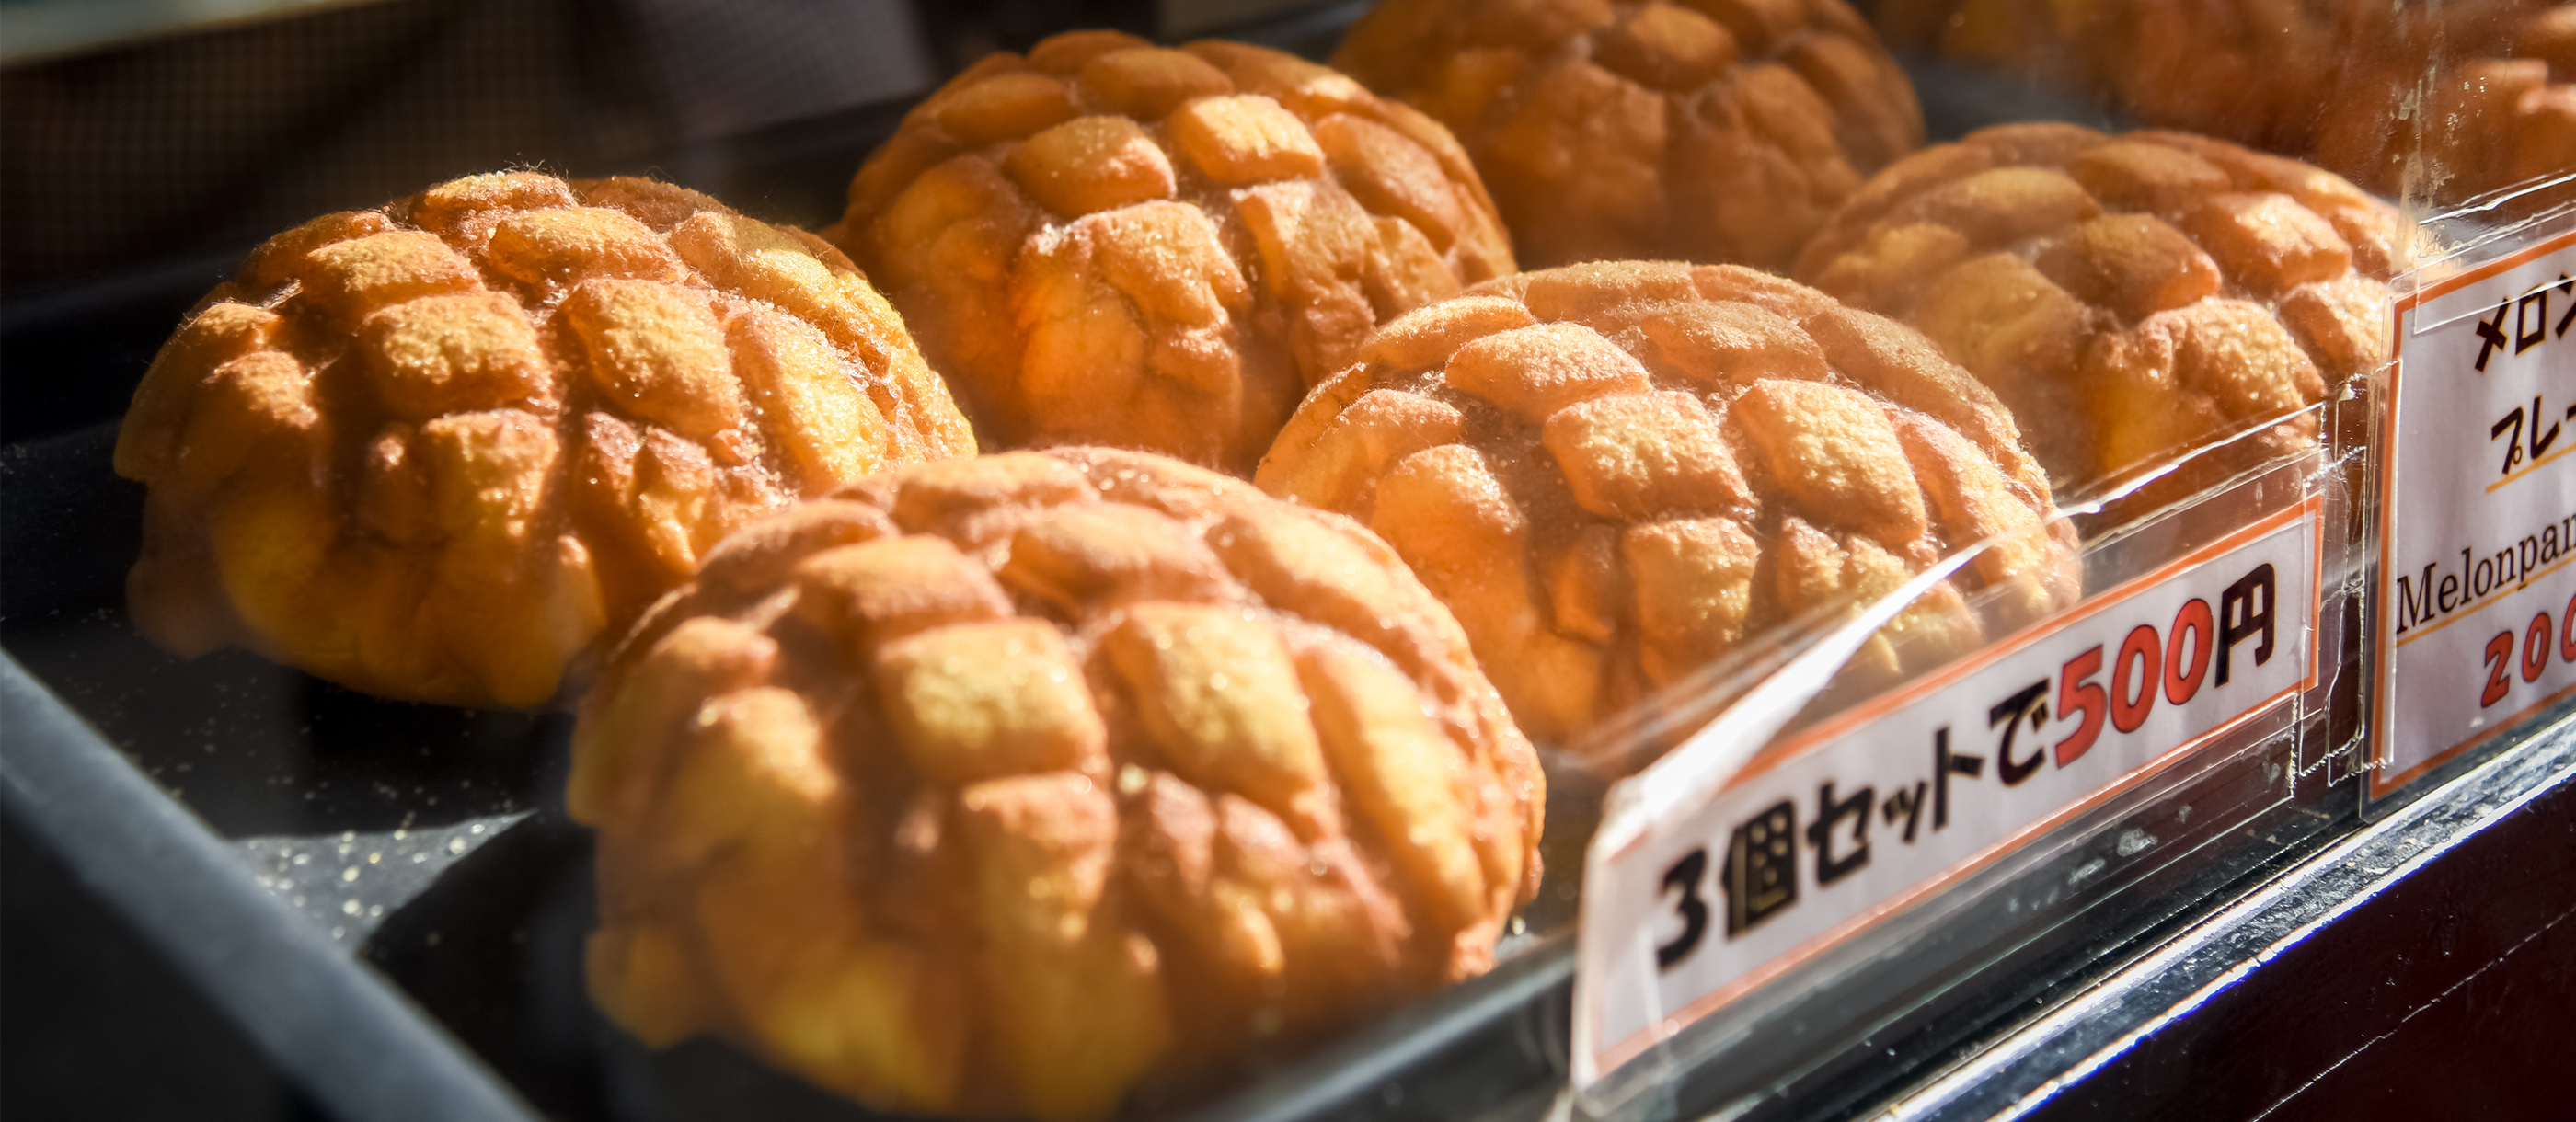 Melonpan | Traditional Sweet Bread From Japan